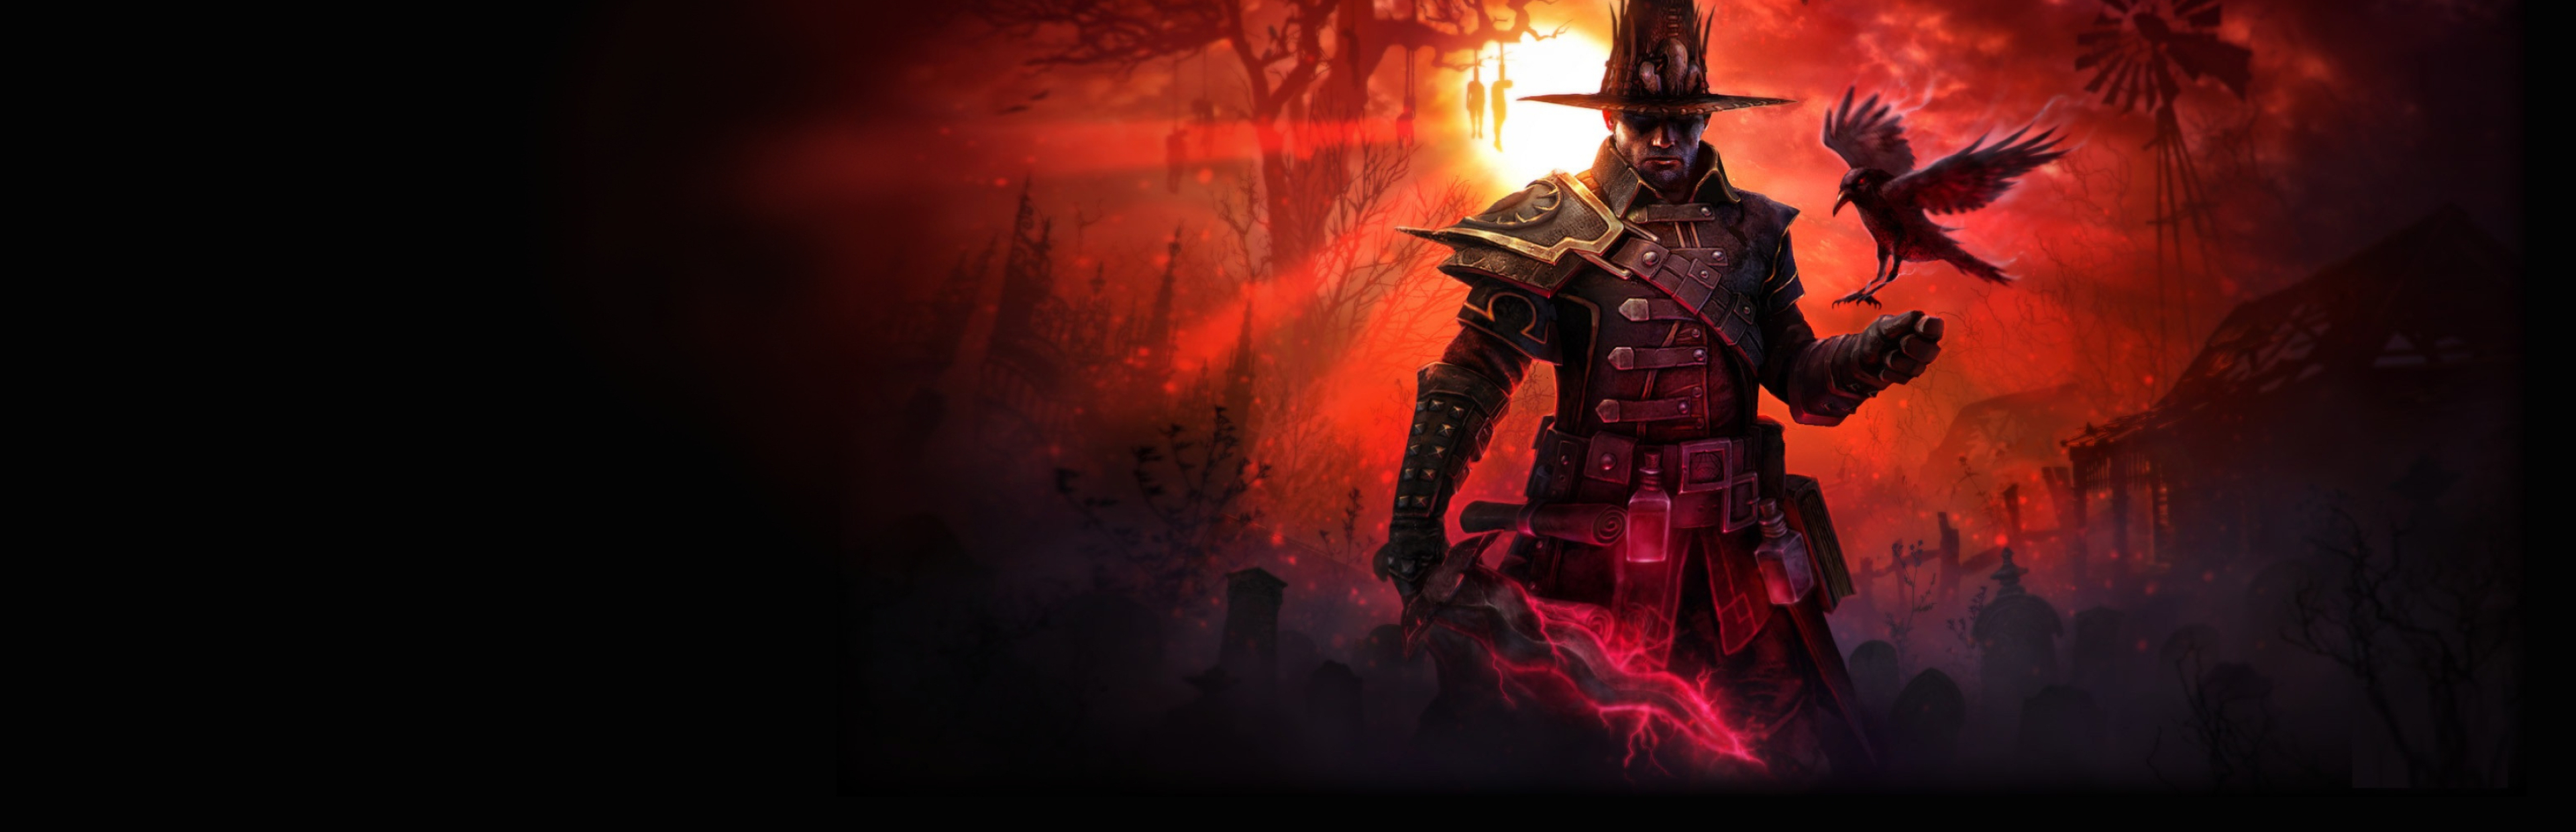 Grim Dawn: A thematically dark fictional world loosely based on the Victorian era. 3840x1240 Dual Screen Wallpaper.